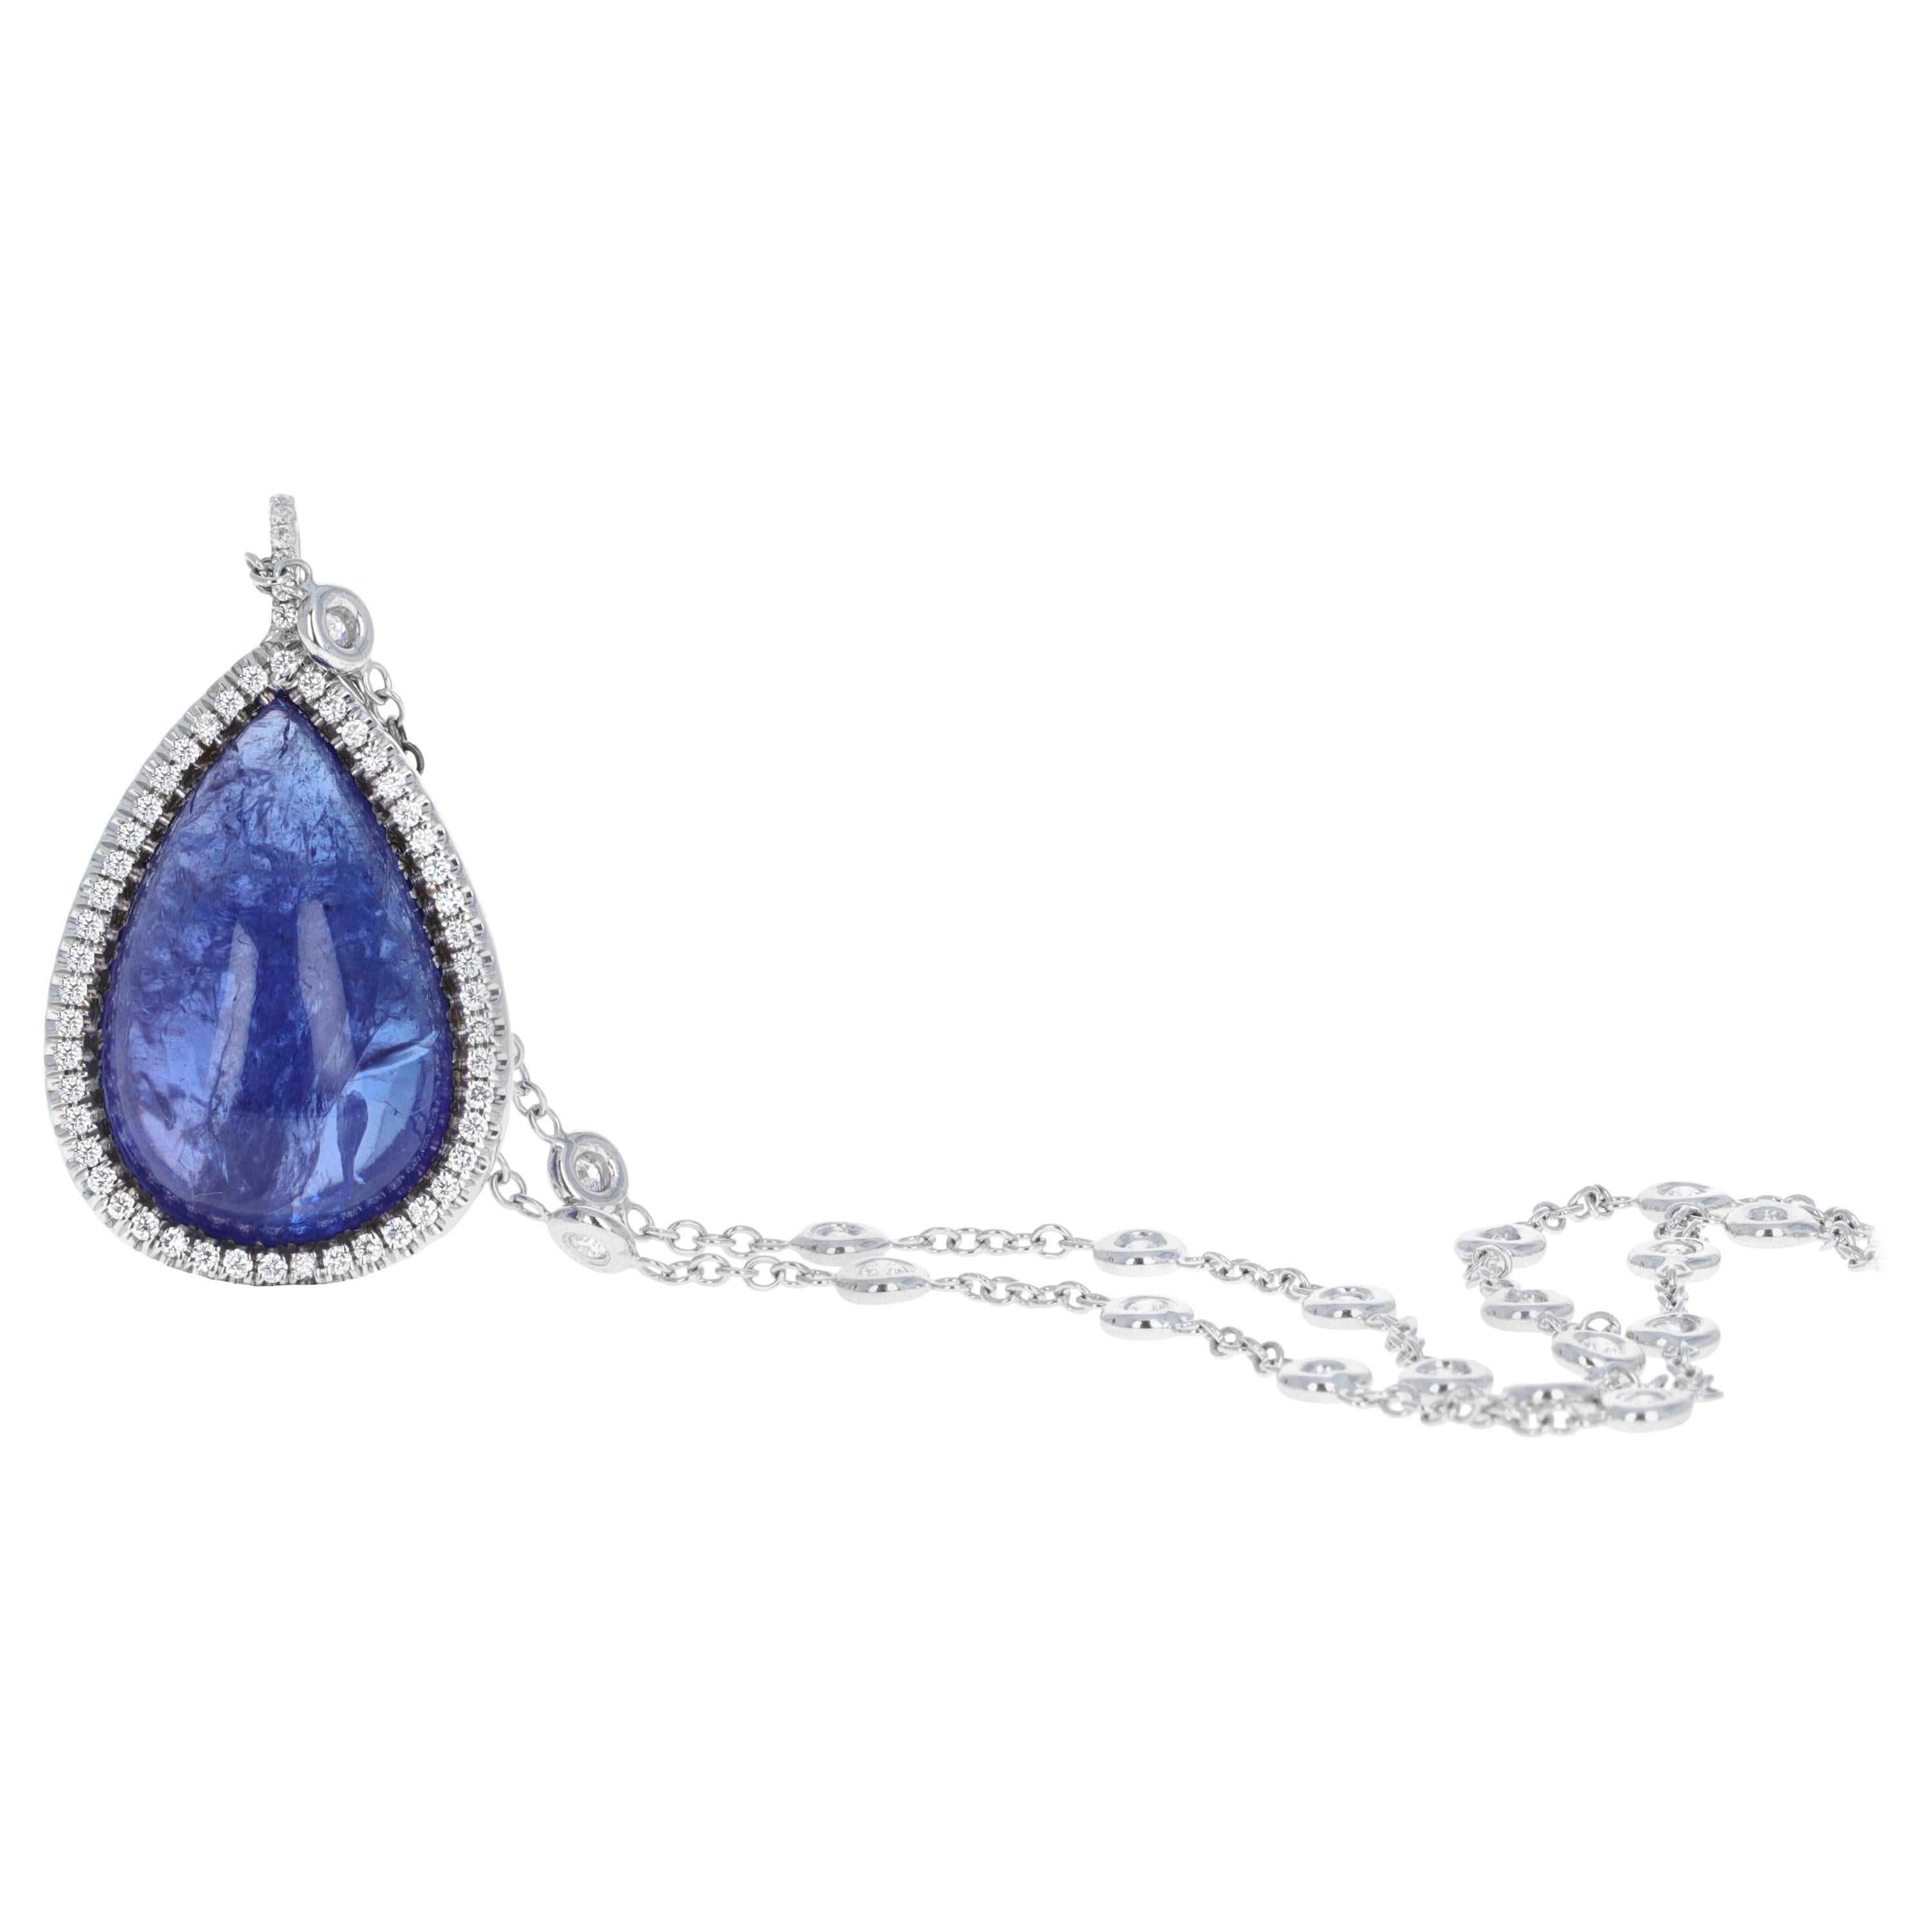 22.32 Carat Tanzanite Pendant with Diamond by the Yard Necklace For Sale